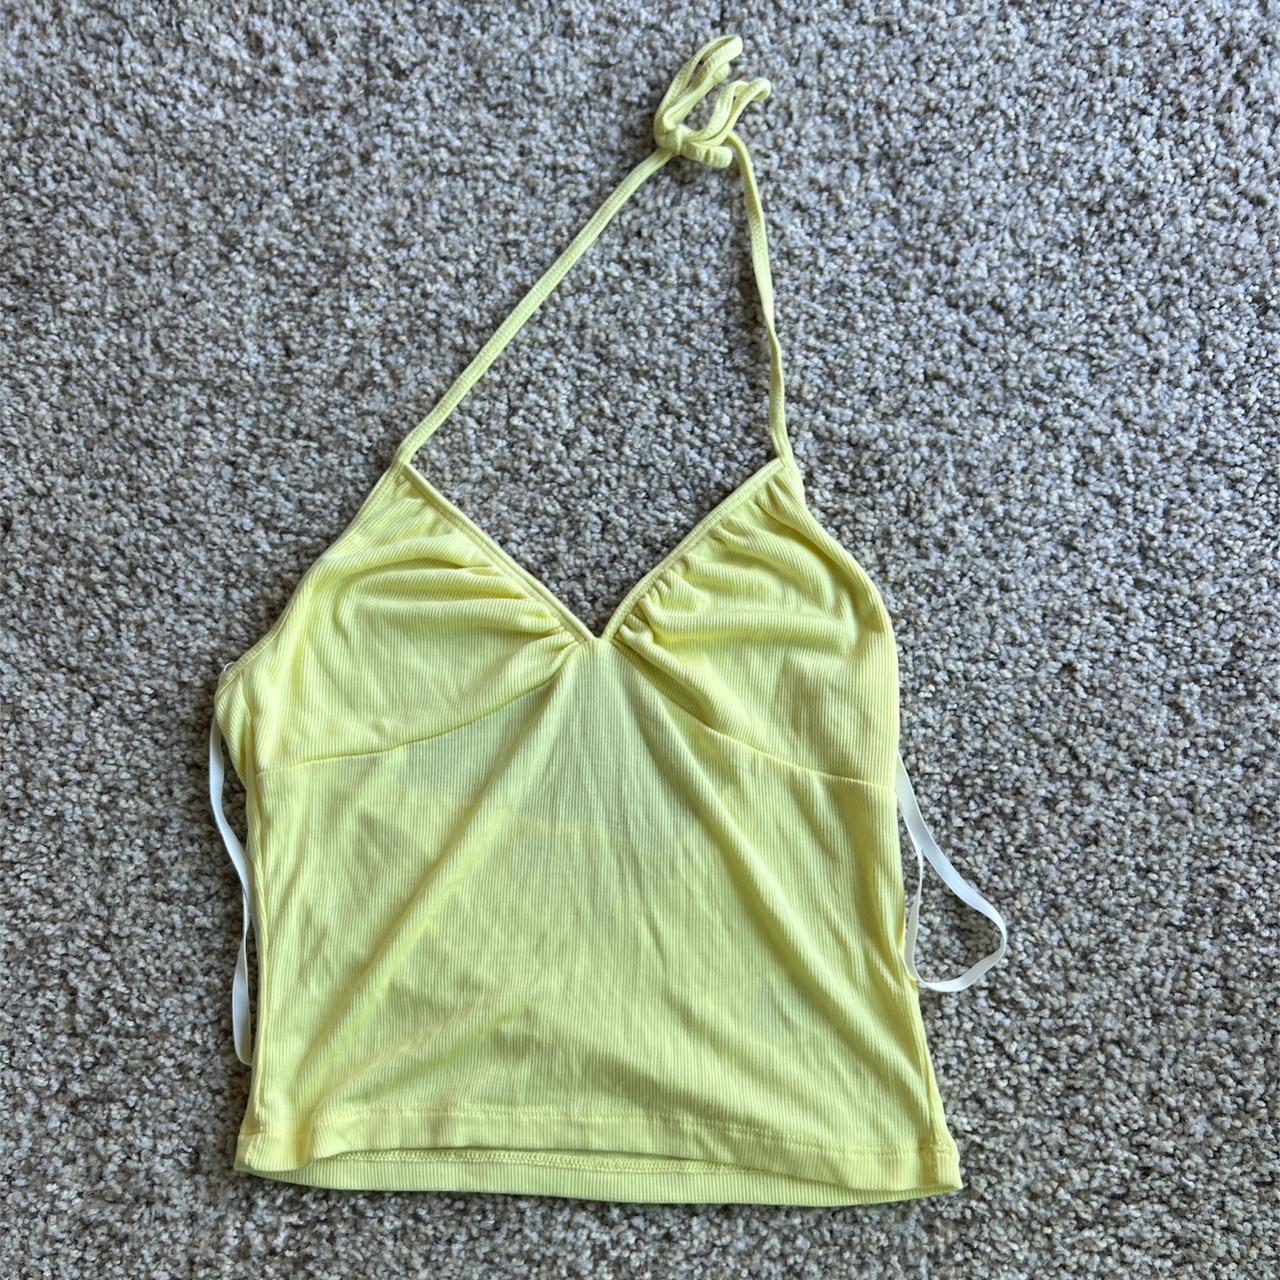 TNA halter top in yellow thin and comfy material... - Depop